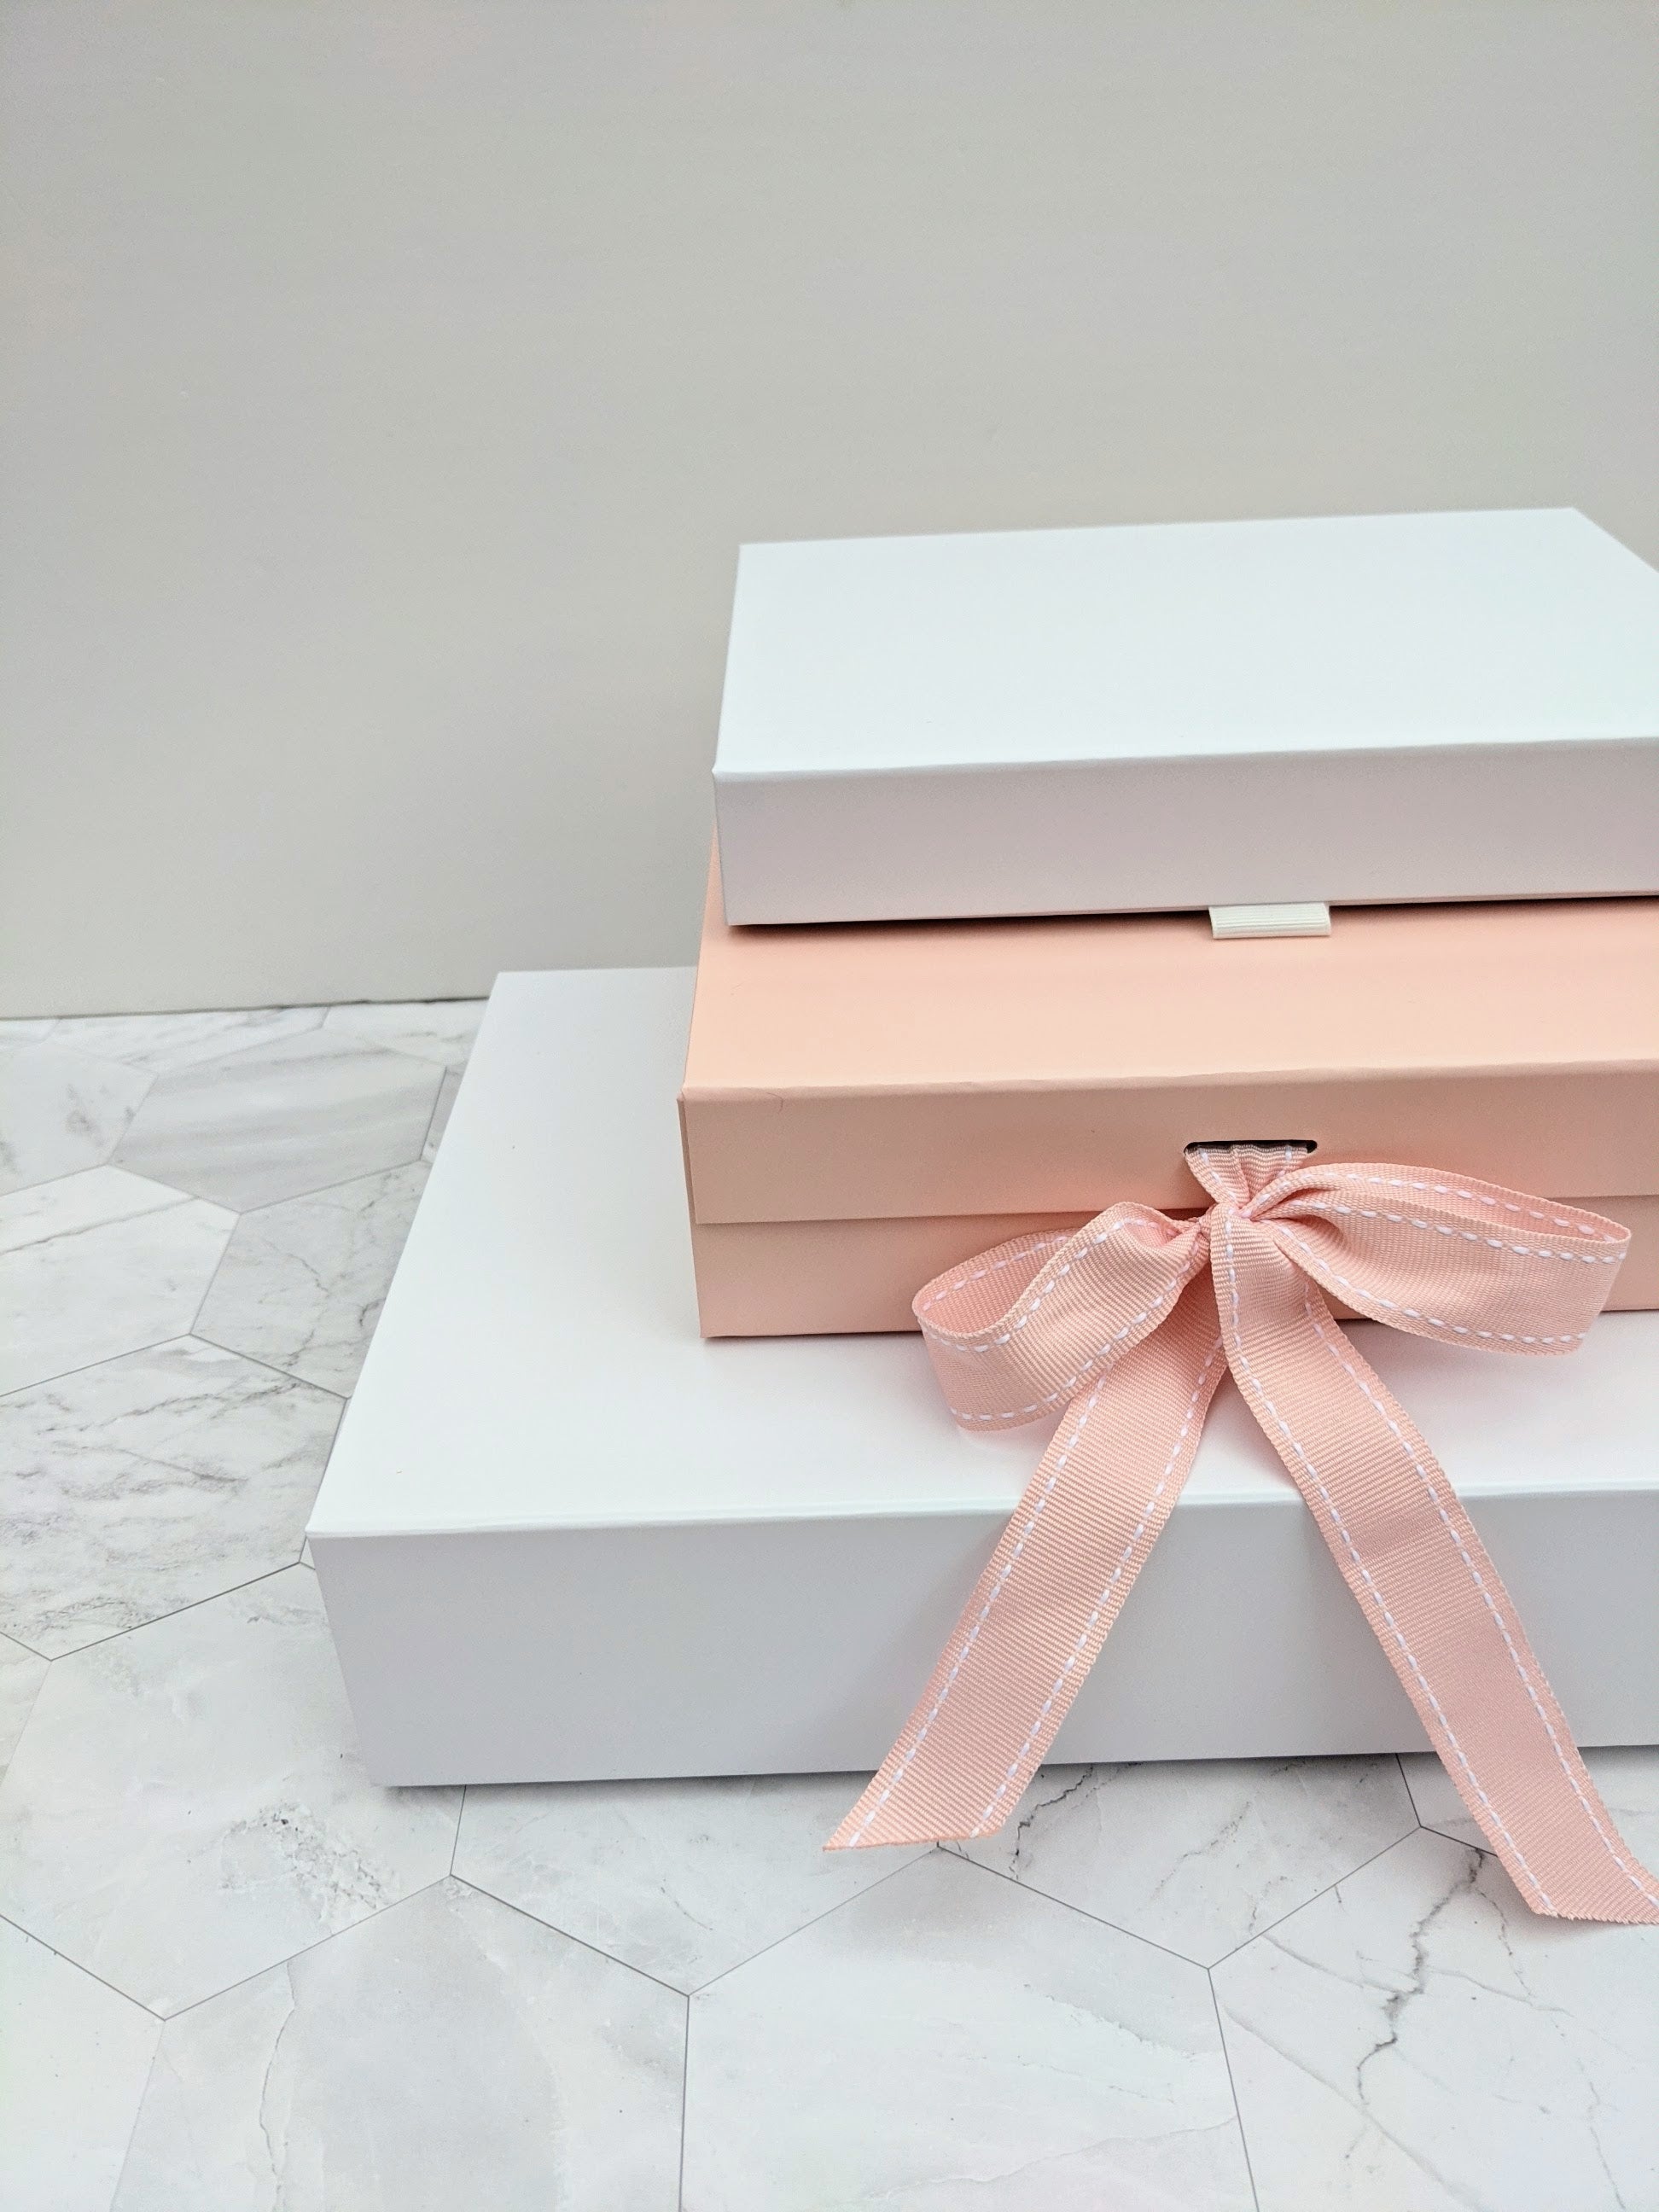 12 Days Luxury Lingerie Gift Boxes – Harlow & Fox